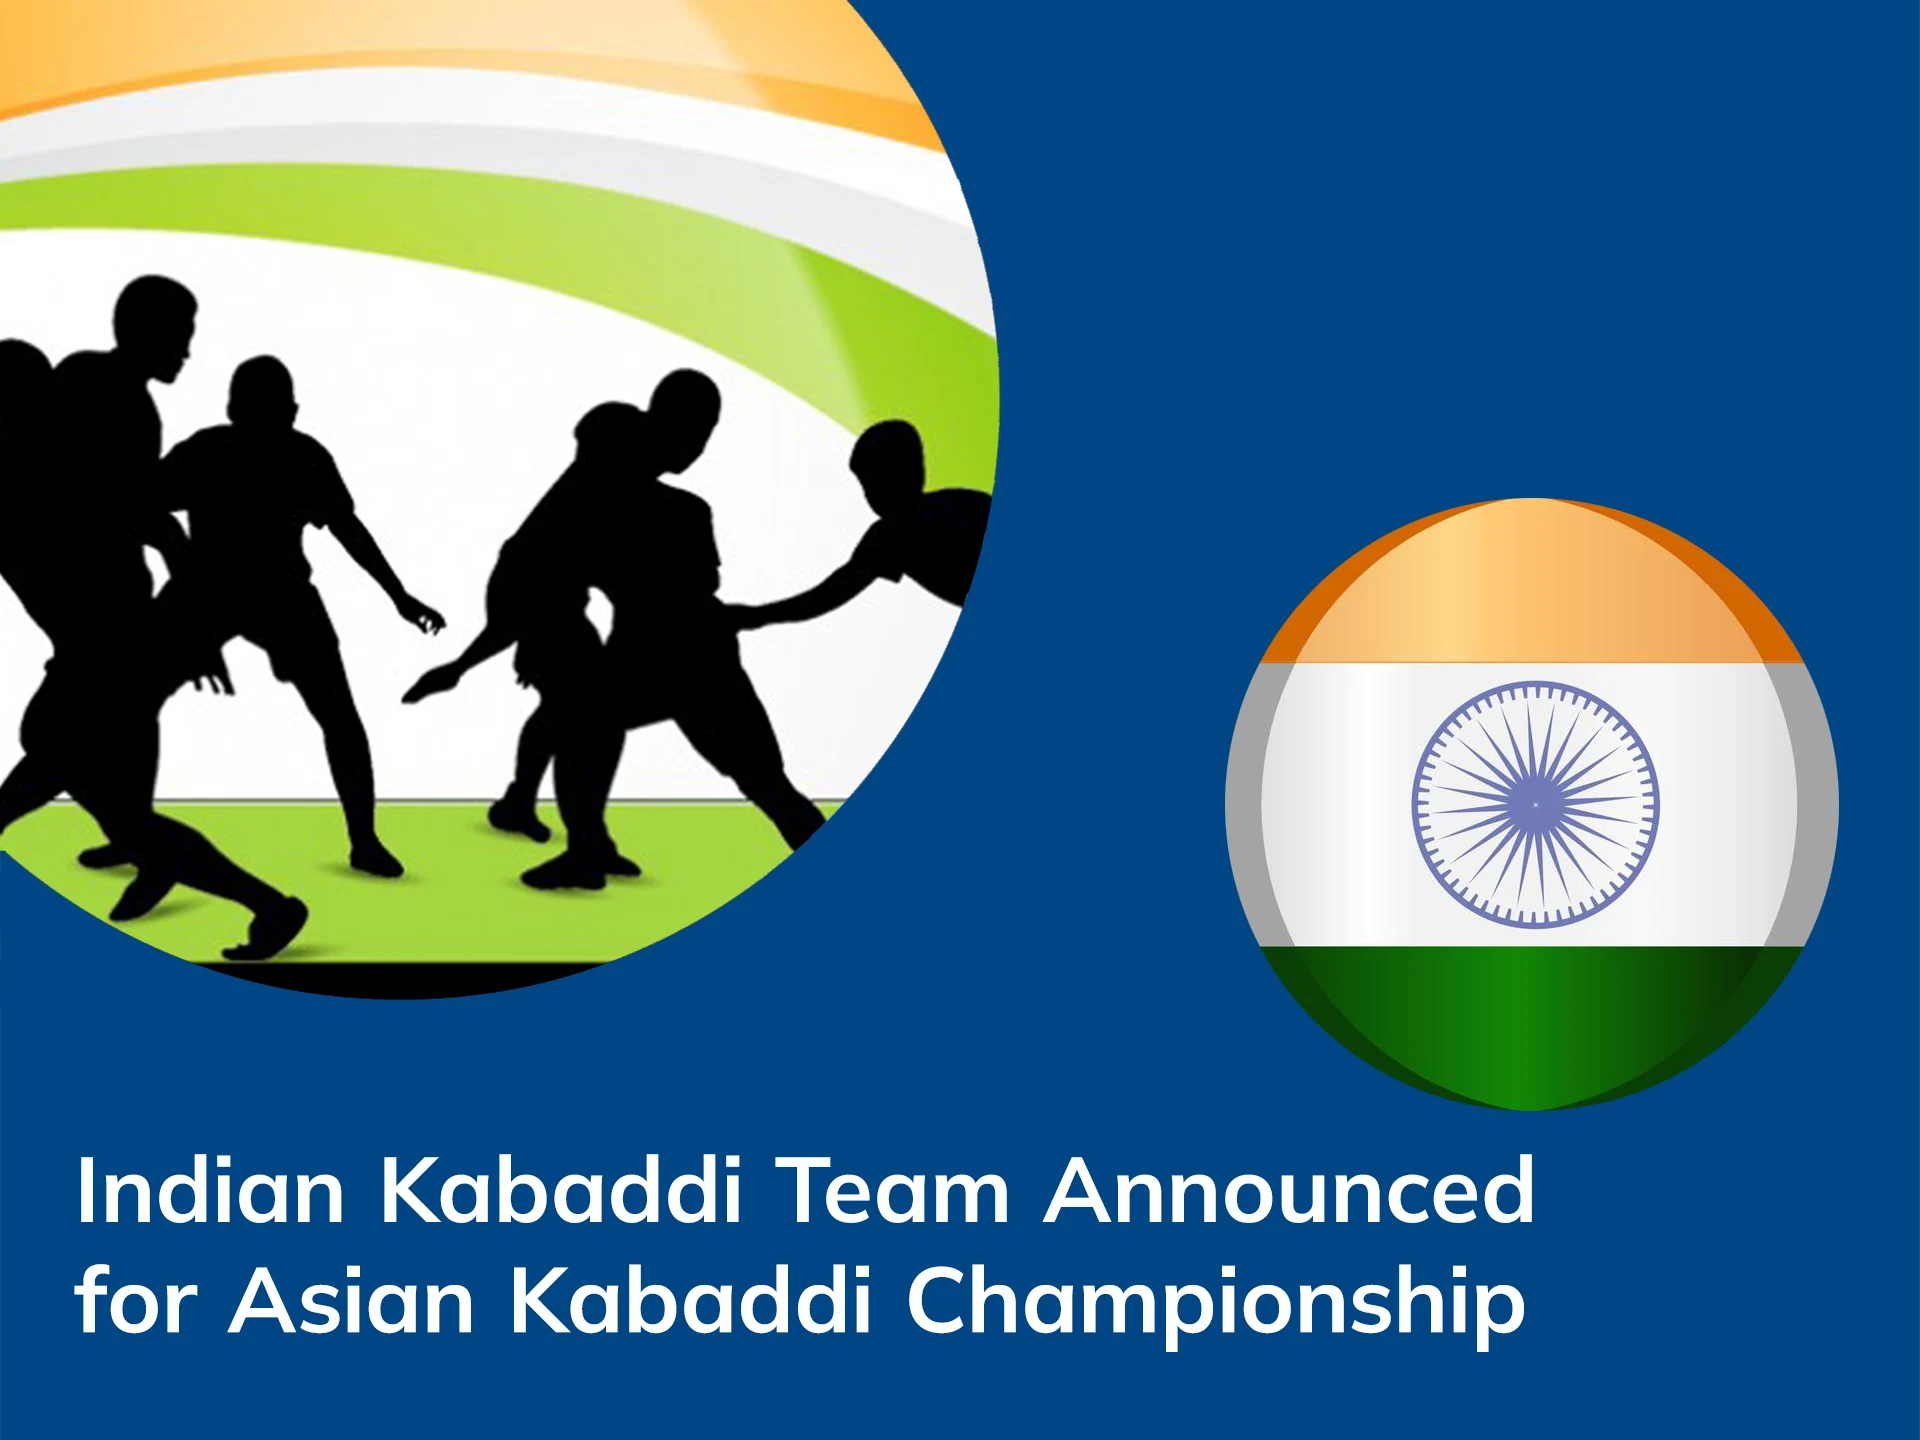 The Indian Kabbadi team is preparing for the championship and is ready to win.